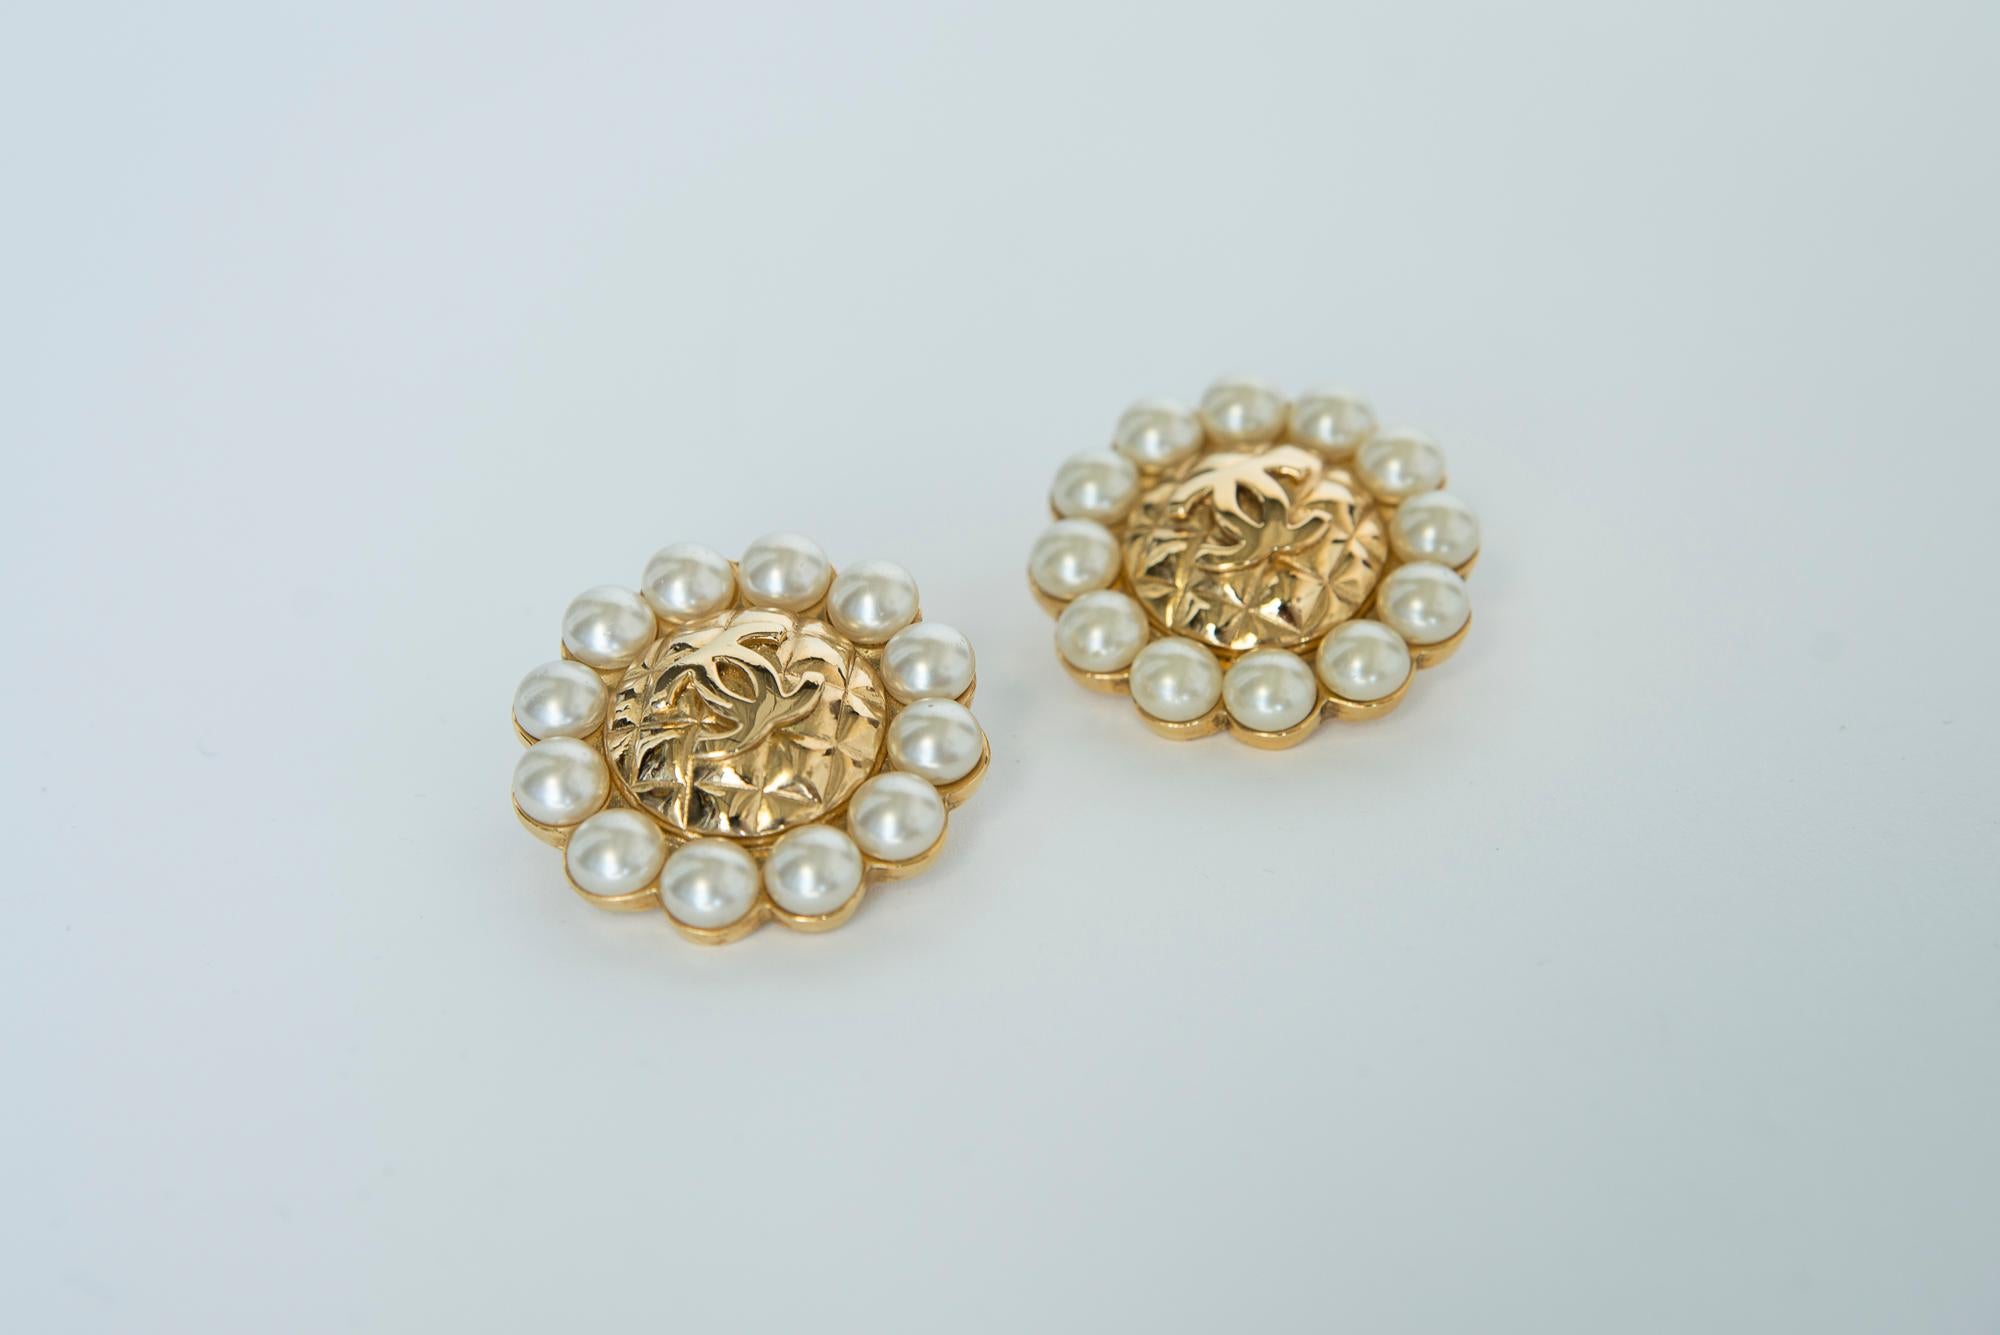 From the Chanel 23 collection, these 80's Chanel earrings are designed with striking proportions - the statement size ensures they'll be seen and admired by everyone you come across. Made from gold-tone metal, an array of lustrous faux pearls are